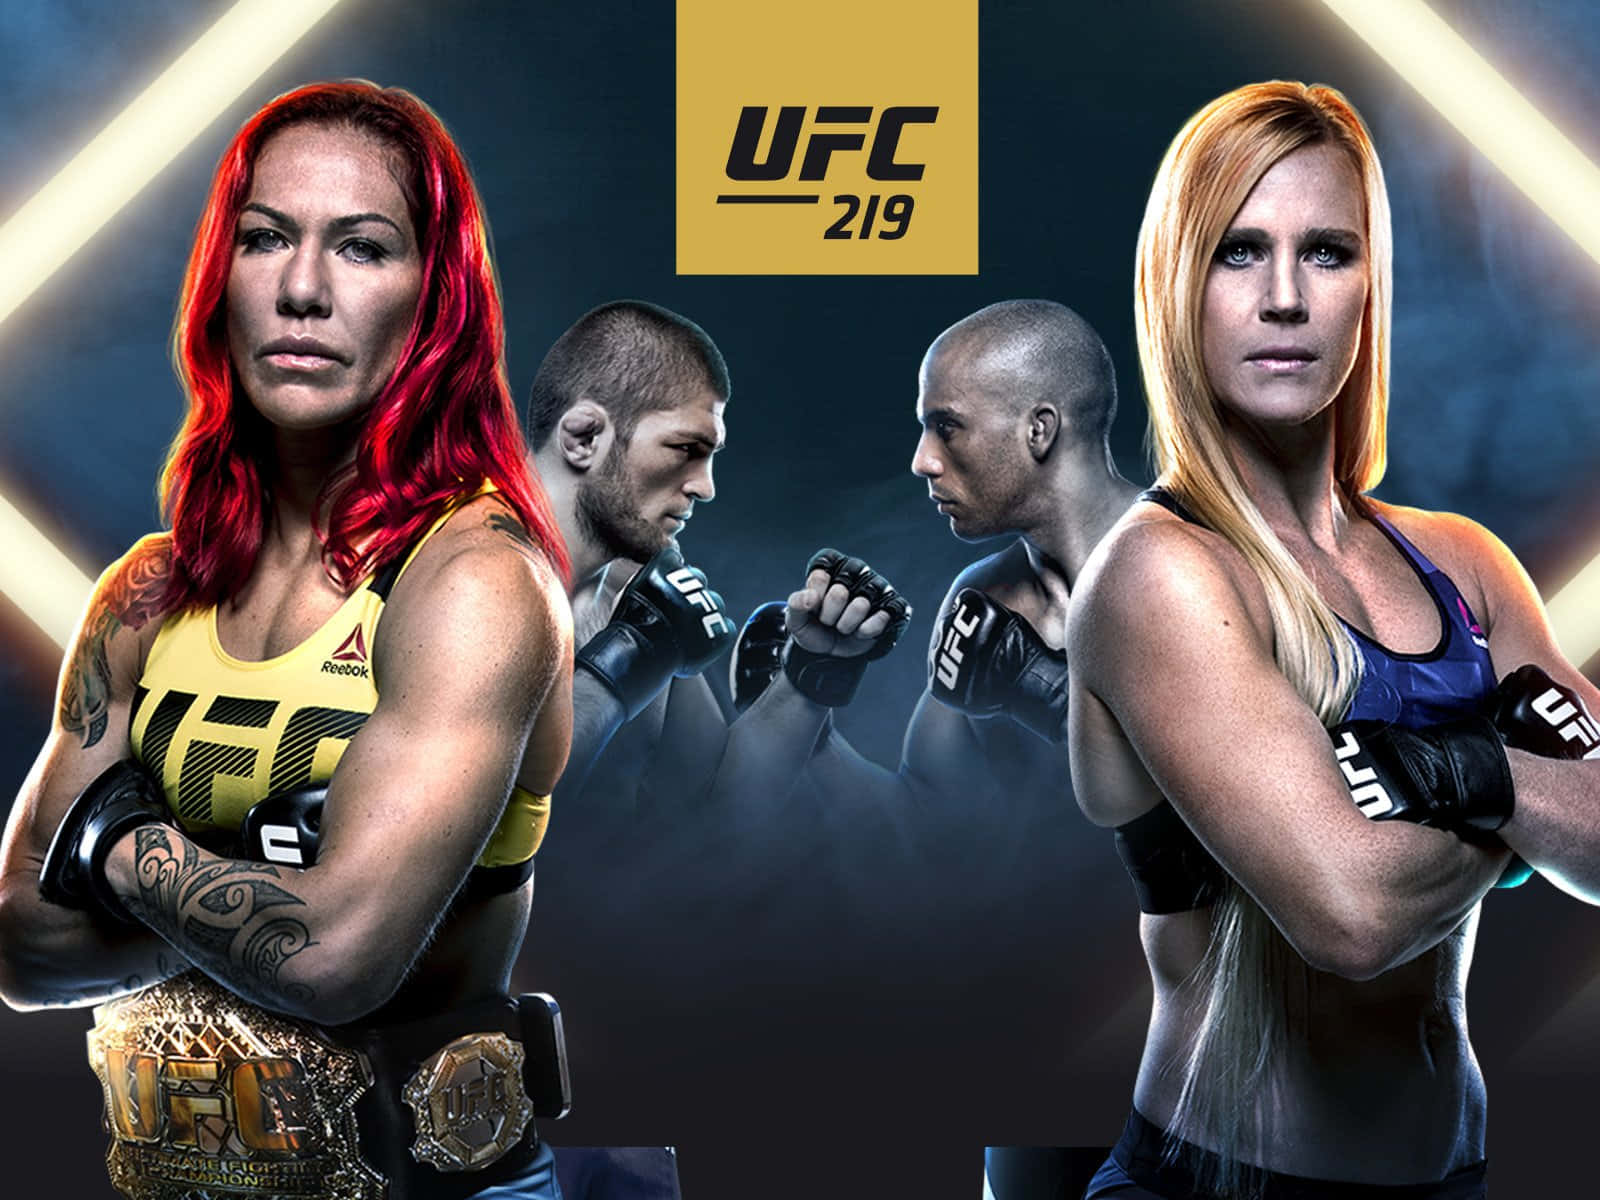 Martial Artists Cris Cyborg And Holly Holm UFC 219 Illustration Wallpaper